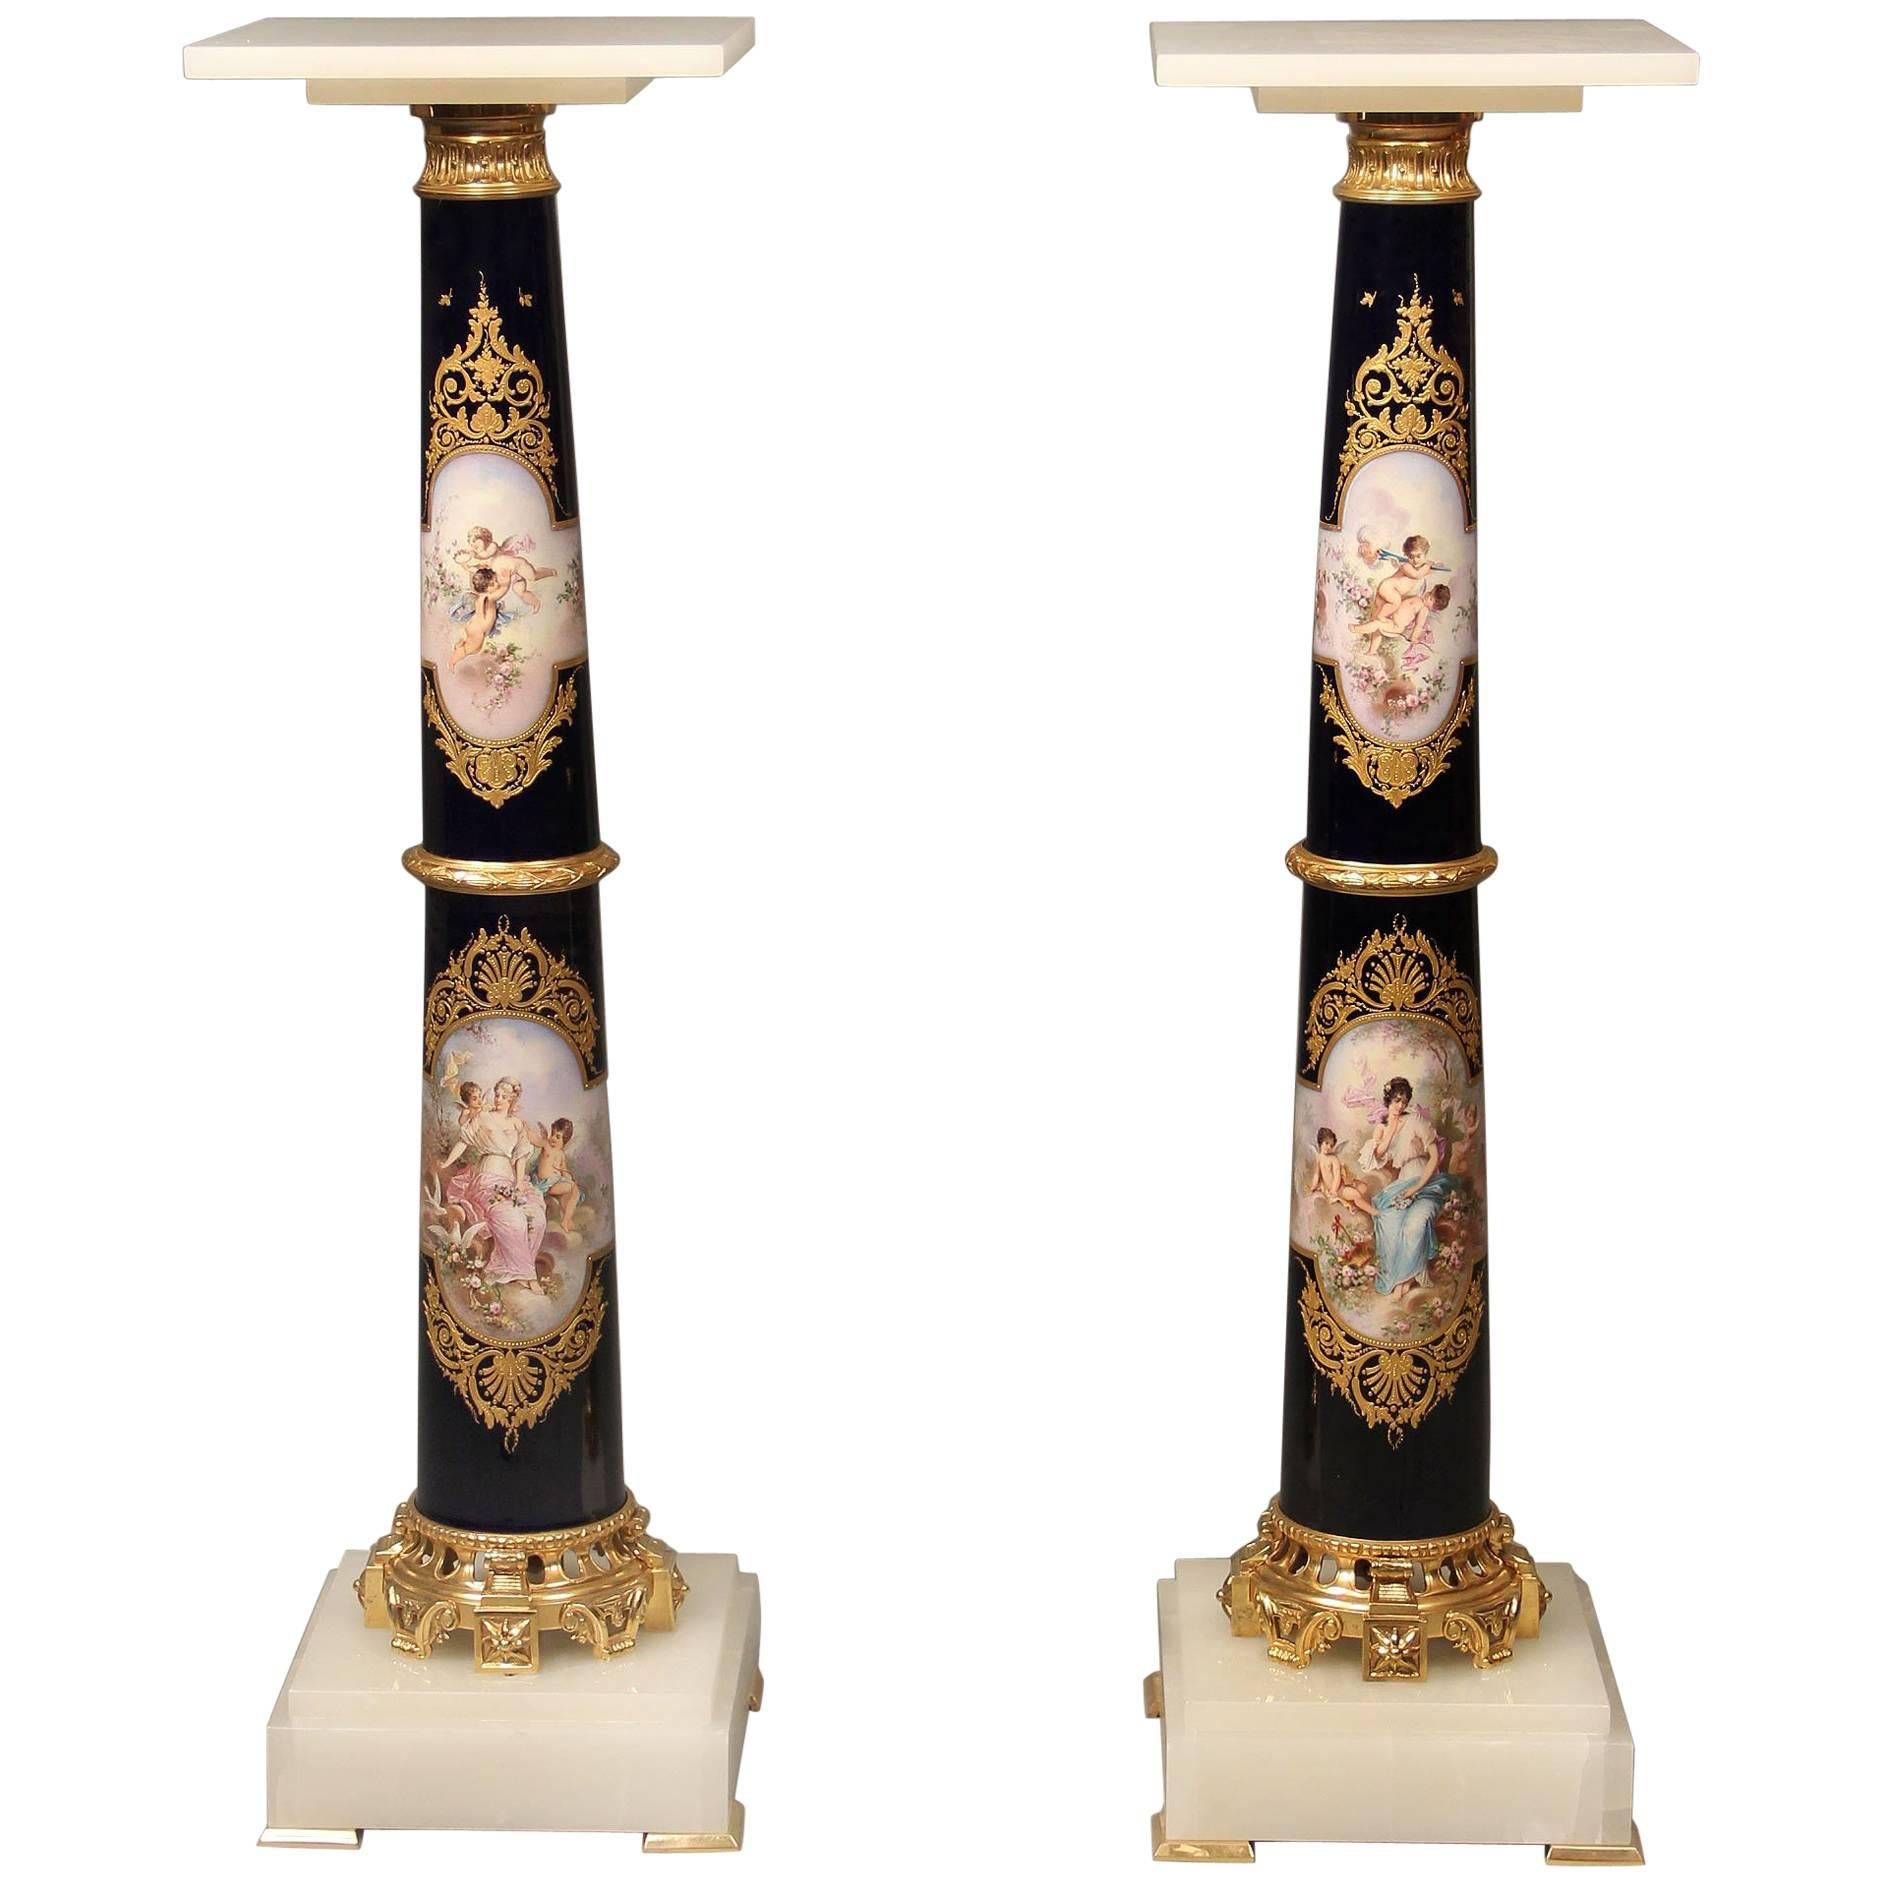 Exceptional Pair of Late 19th Century Gilt Bronze Mounted Sèvres Pedestals